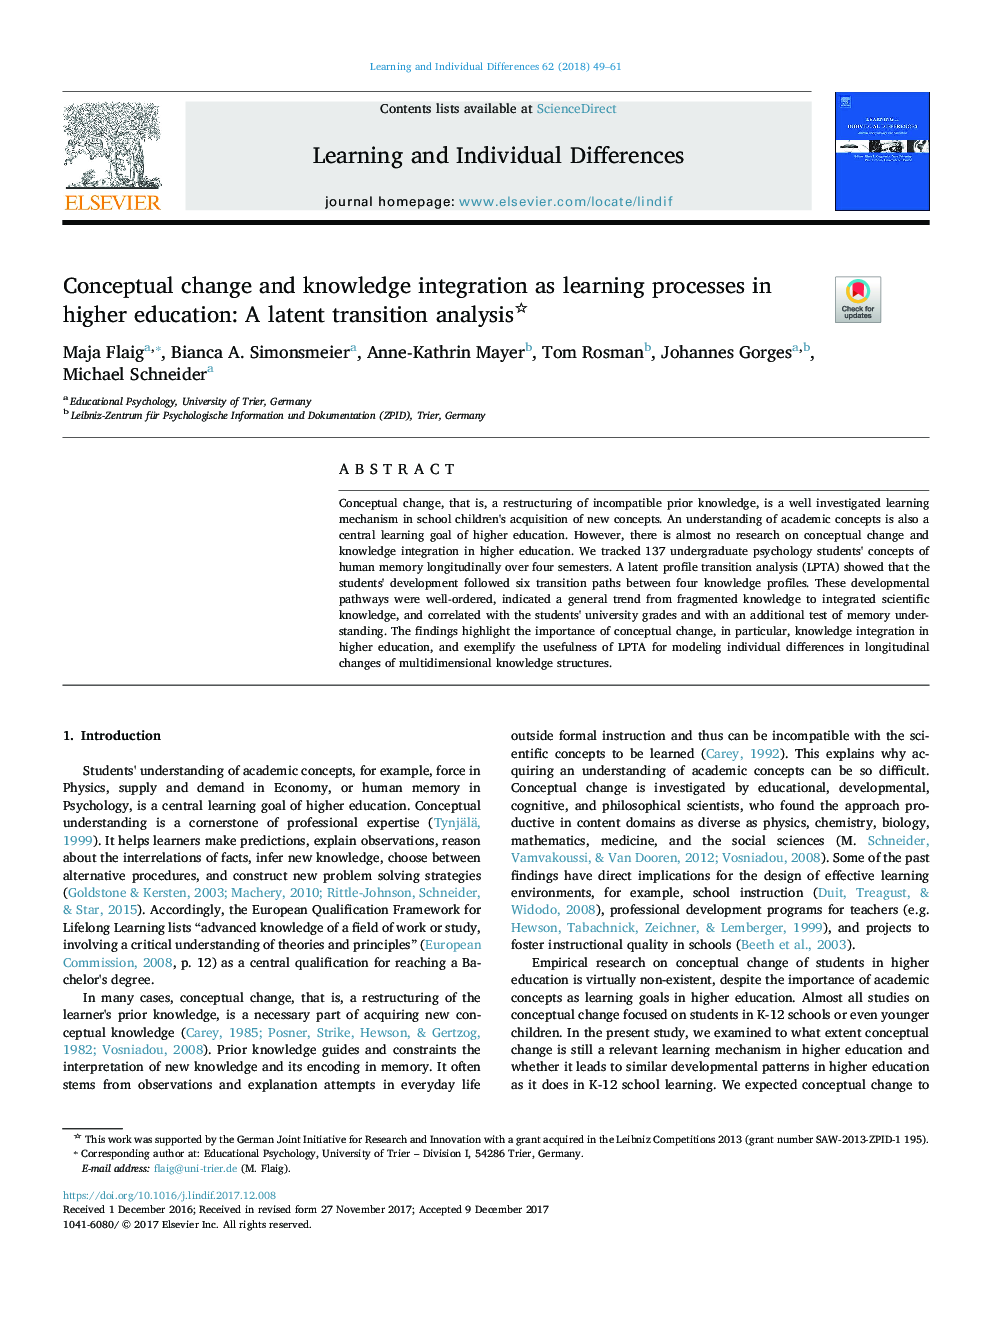 Conceptual change and knowledge integration as learning processes in higher education: A latent transition analysis